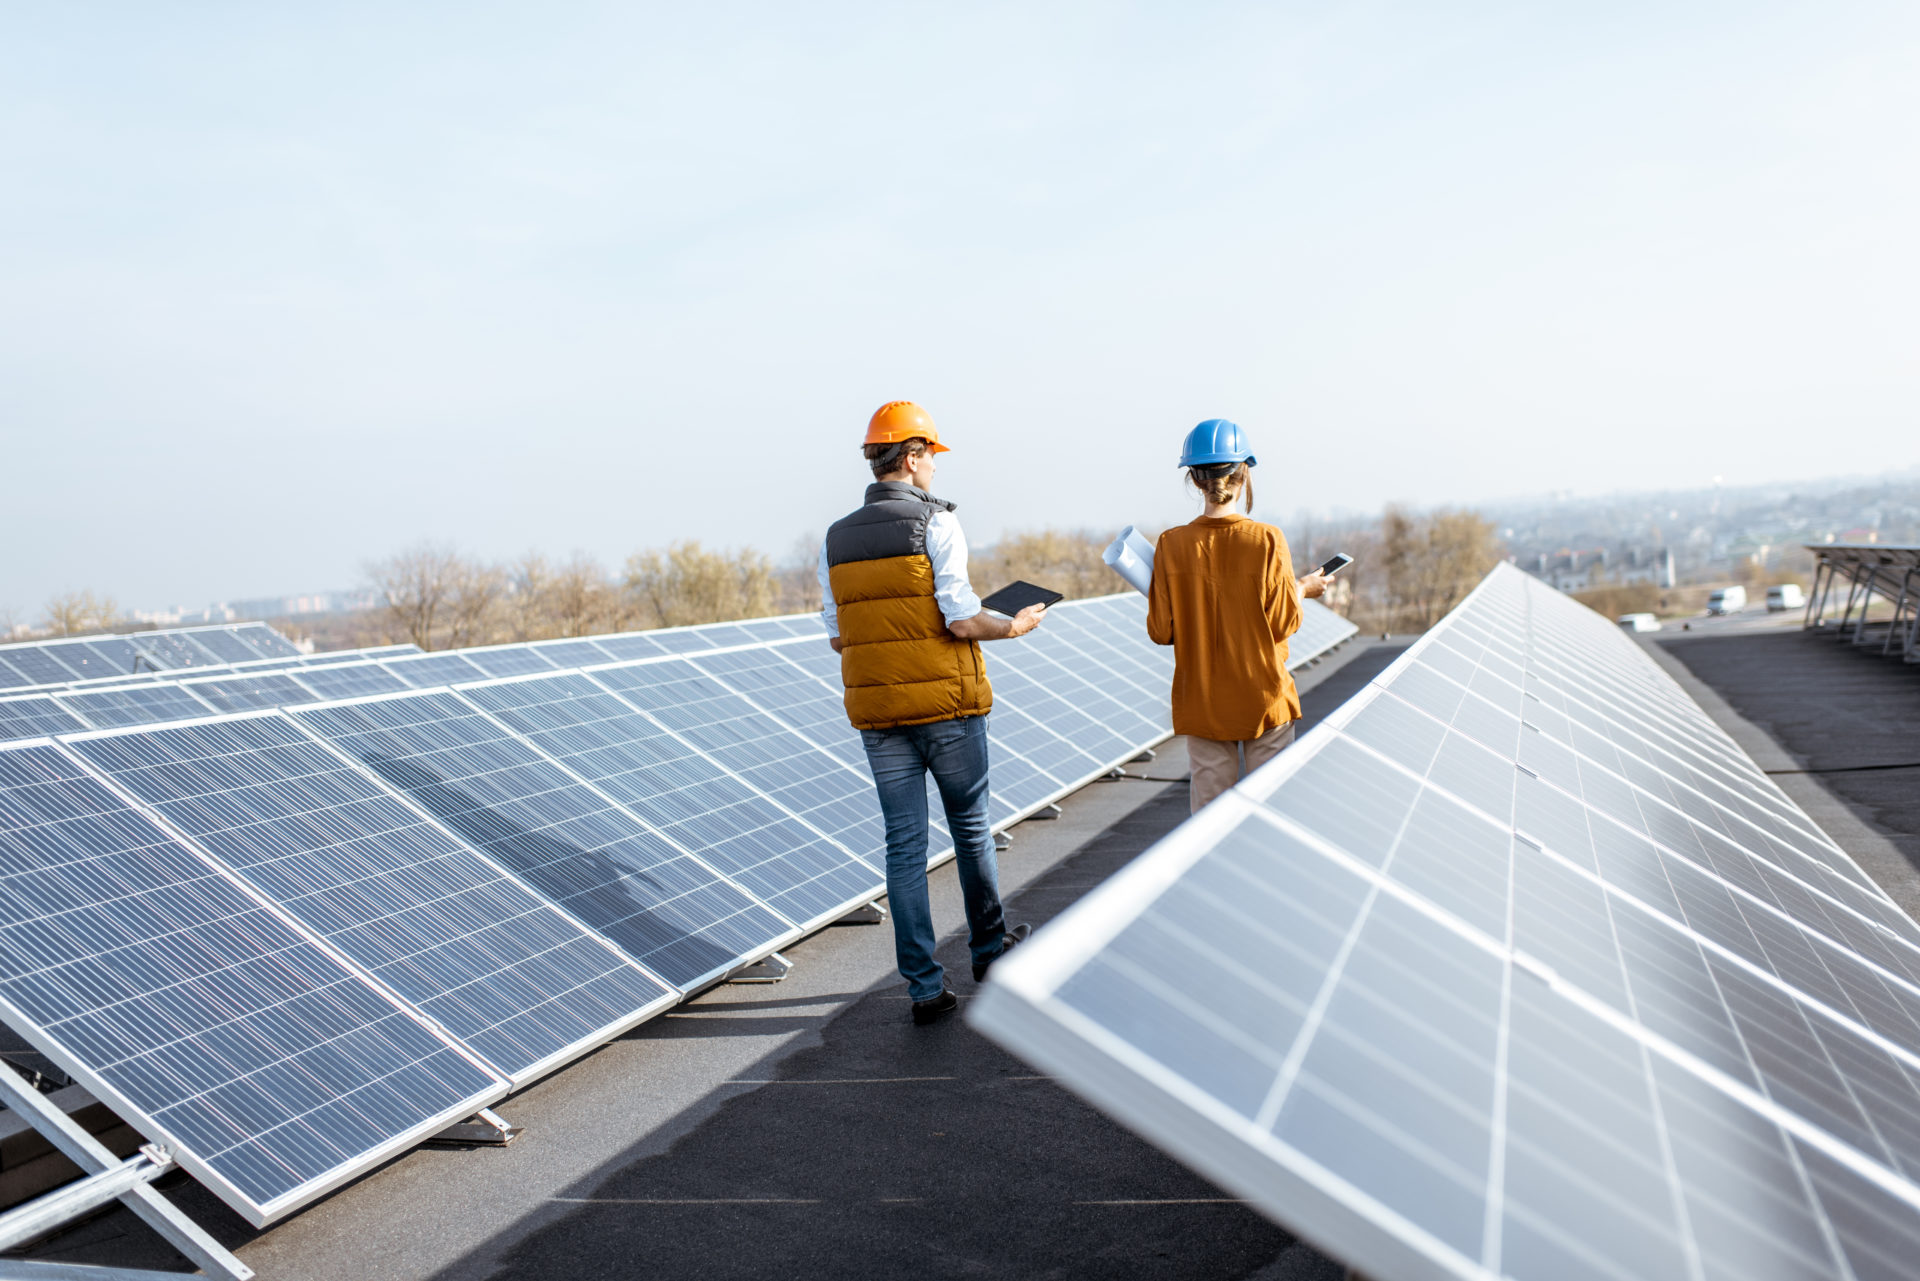 Two workers checking solar panels